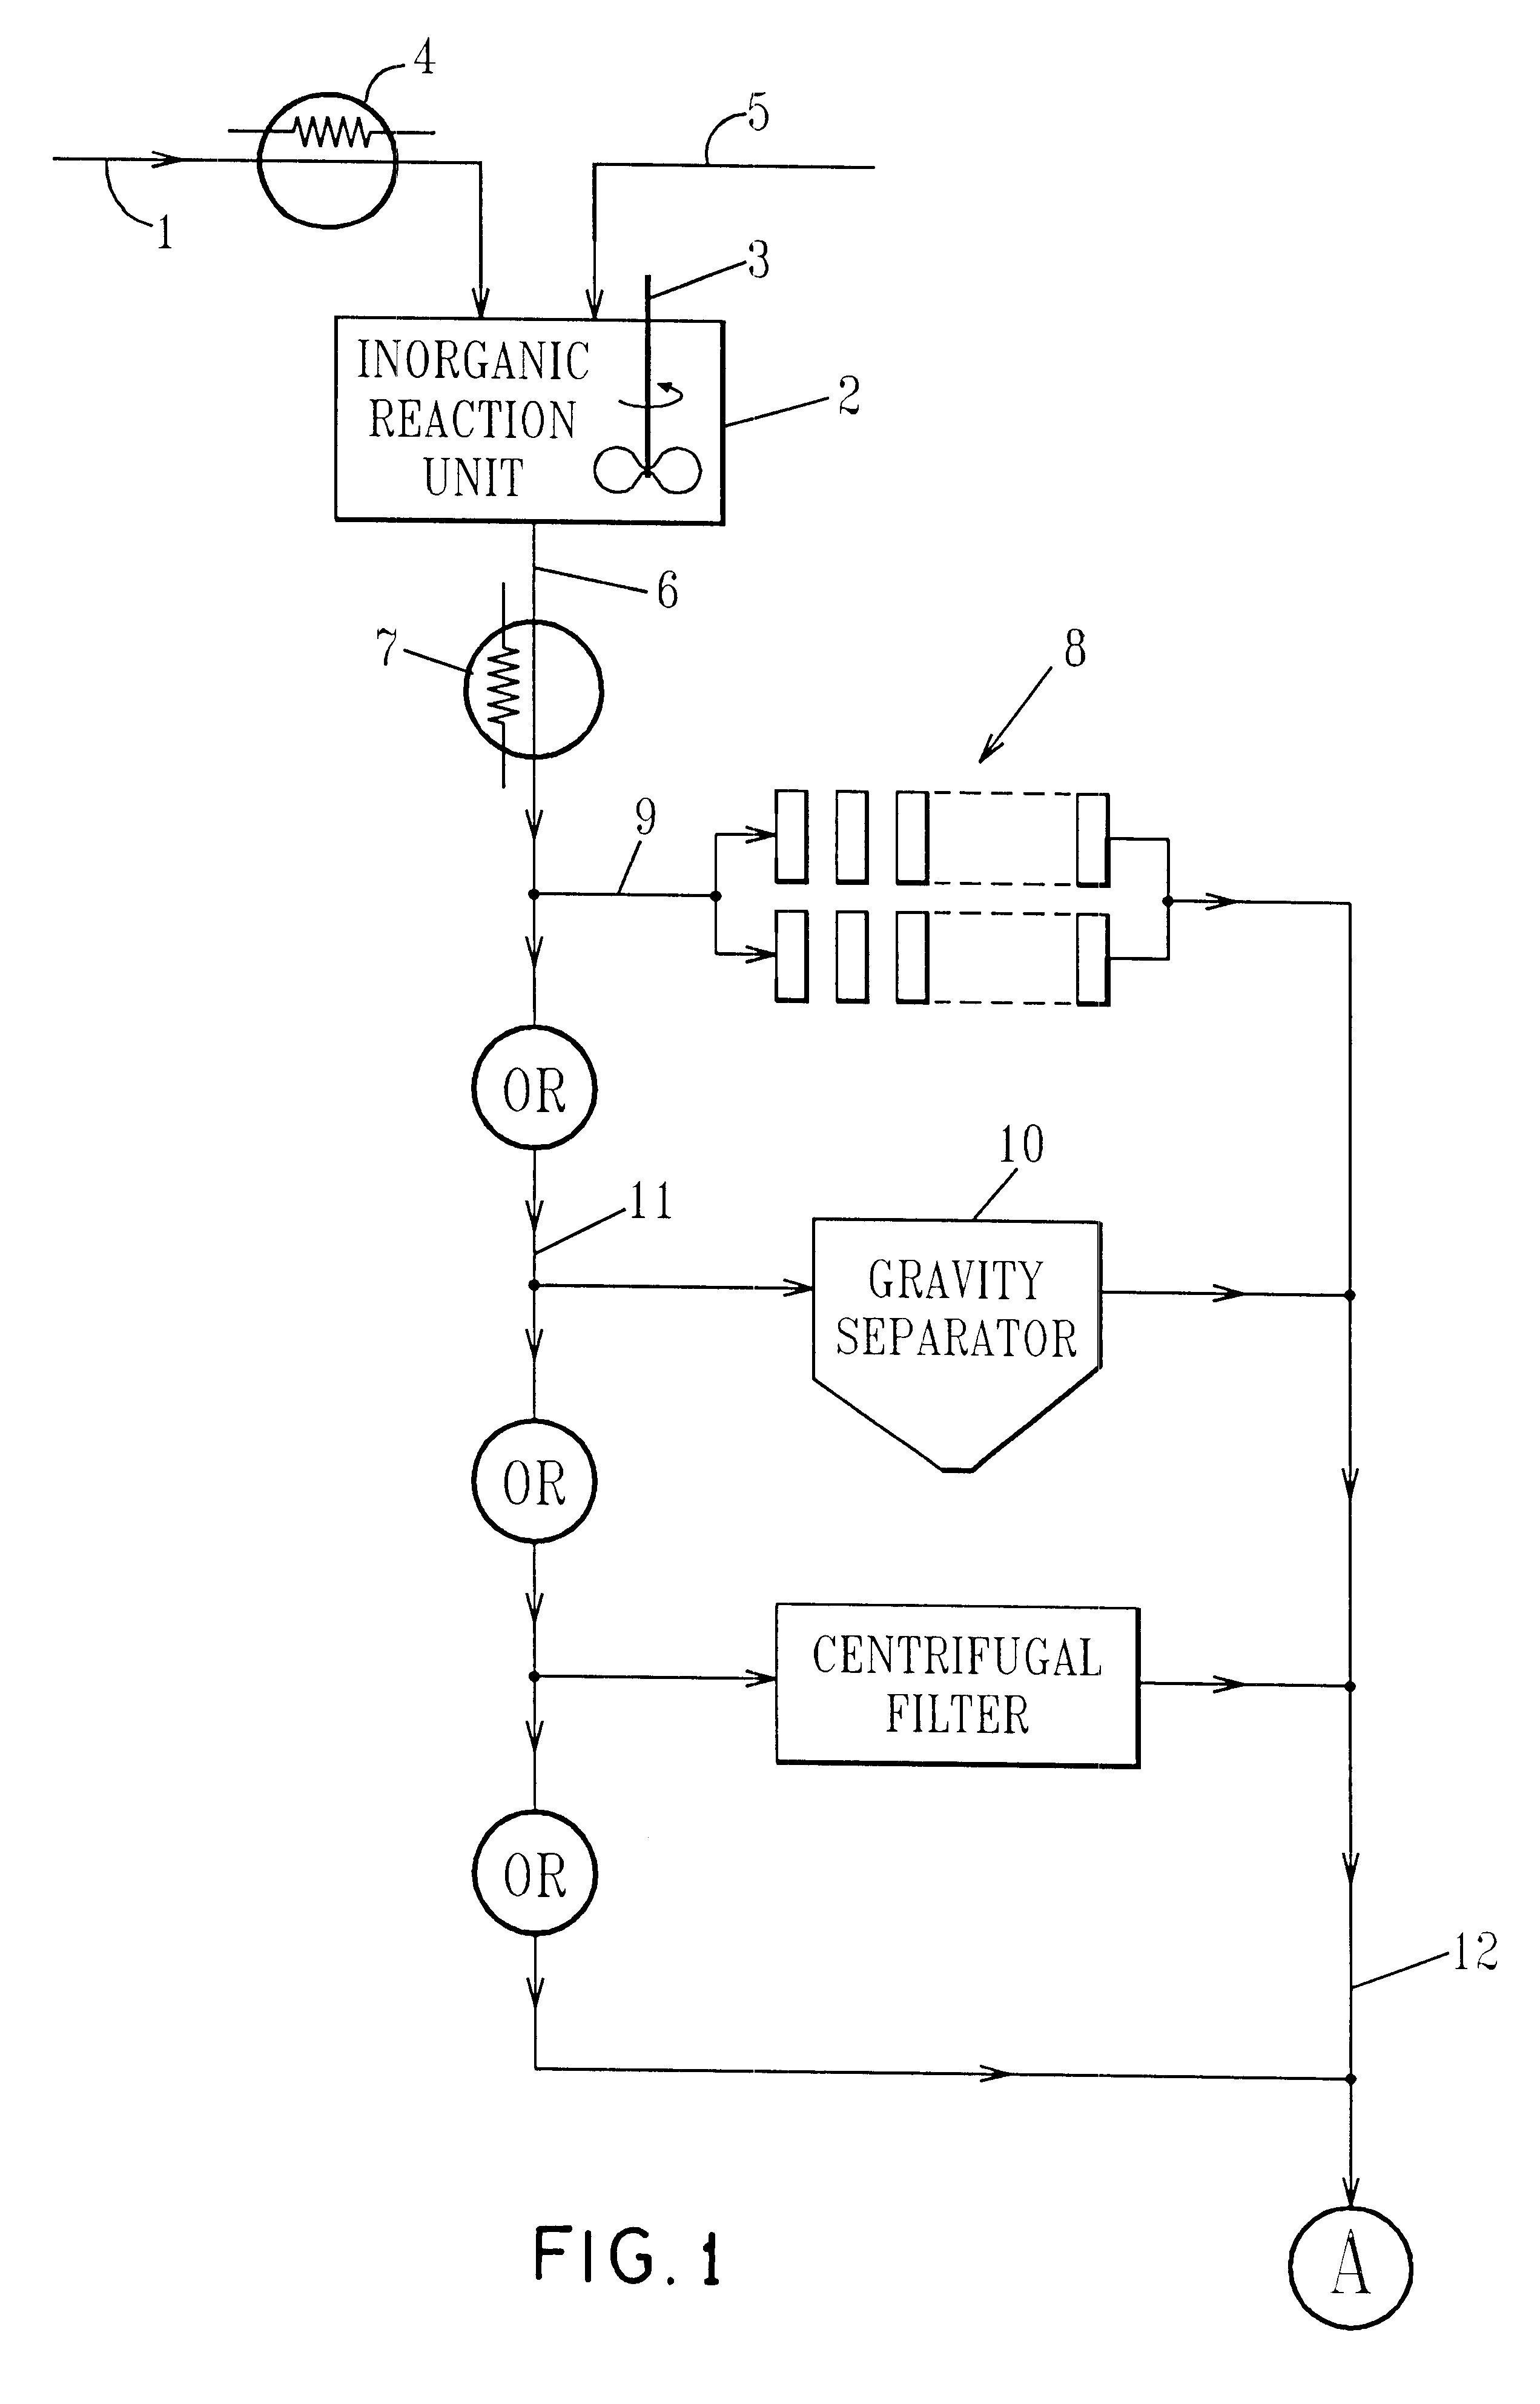 Method for recovering an organic solvent from an acidic waste stream such as in integrated chip manufacturing